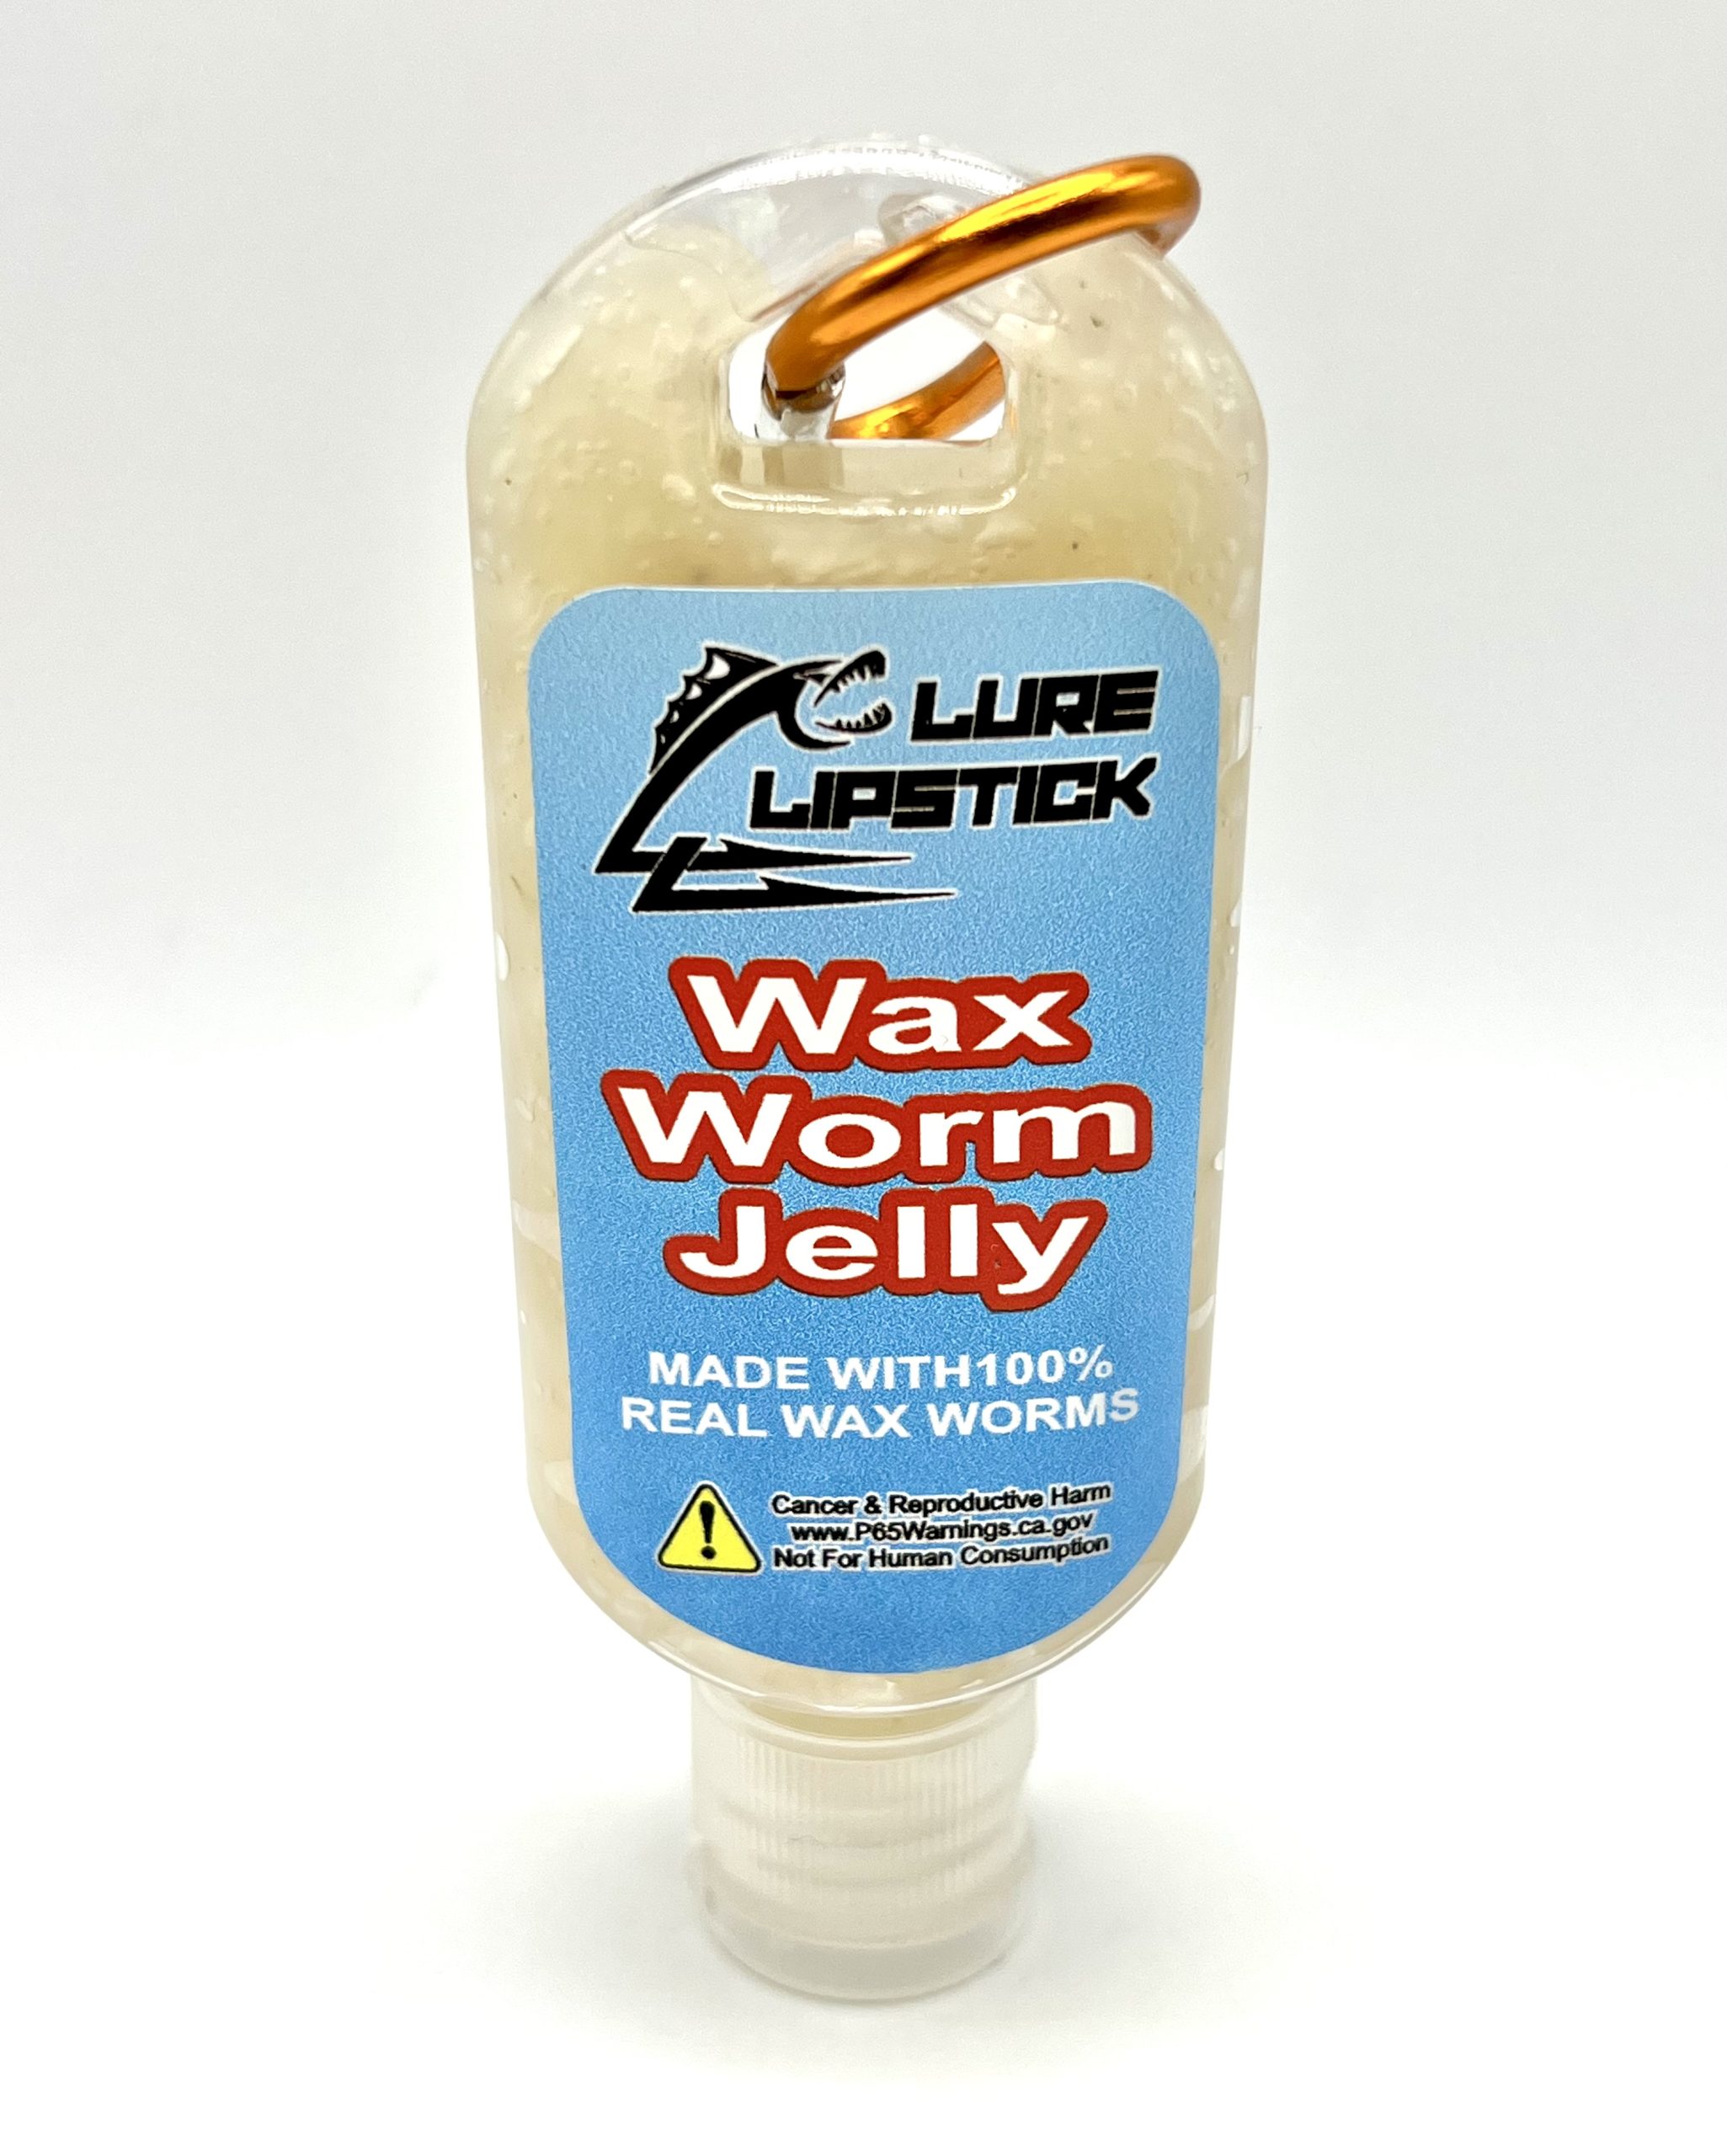 Lure Lipstick - Wax Worm Jelly - 3oz. Available in Squirt Top or Screw Top  Jar